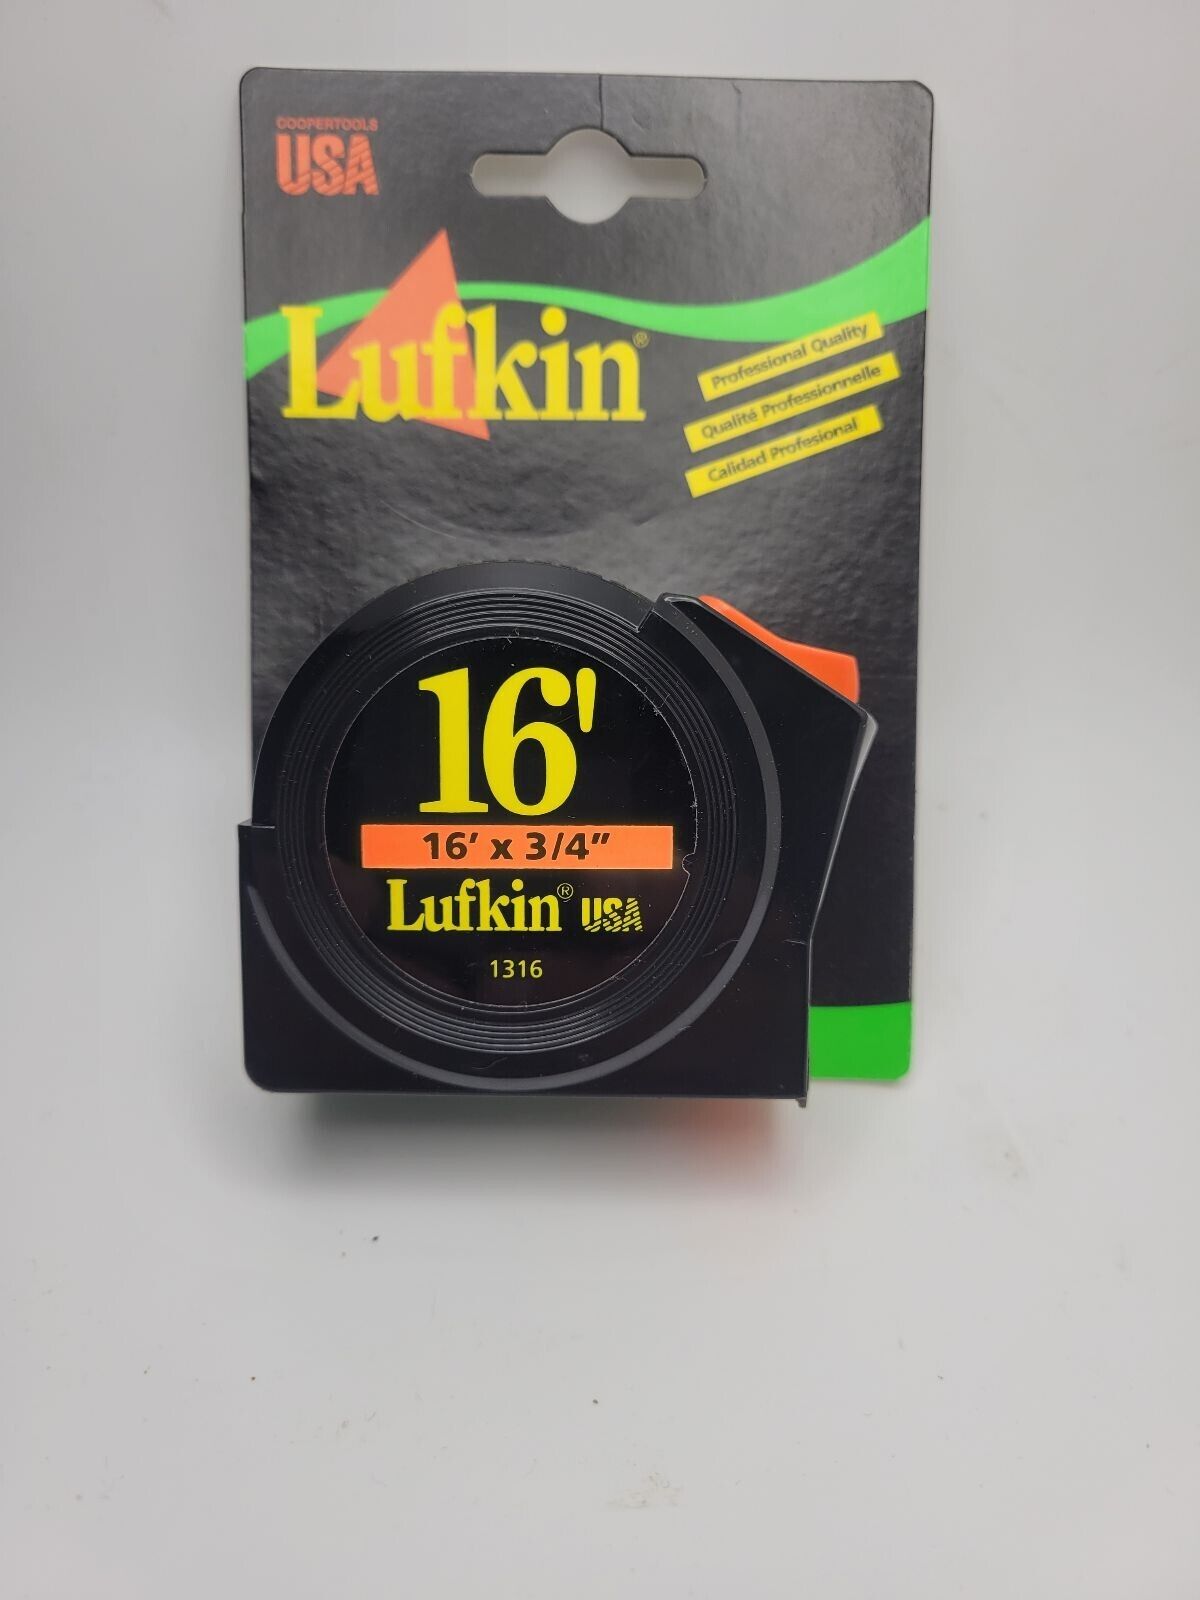 Lufkin 3/4 x 16ft  tape measure 1316 Black  made in USA